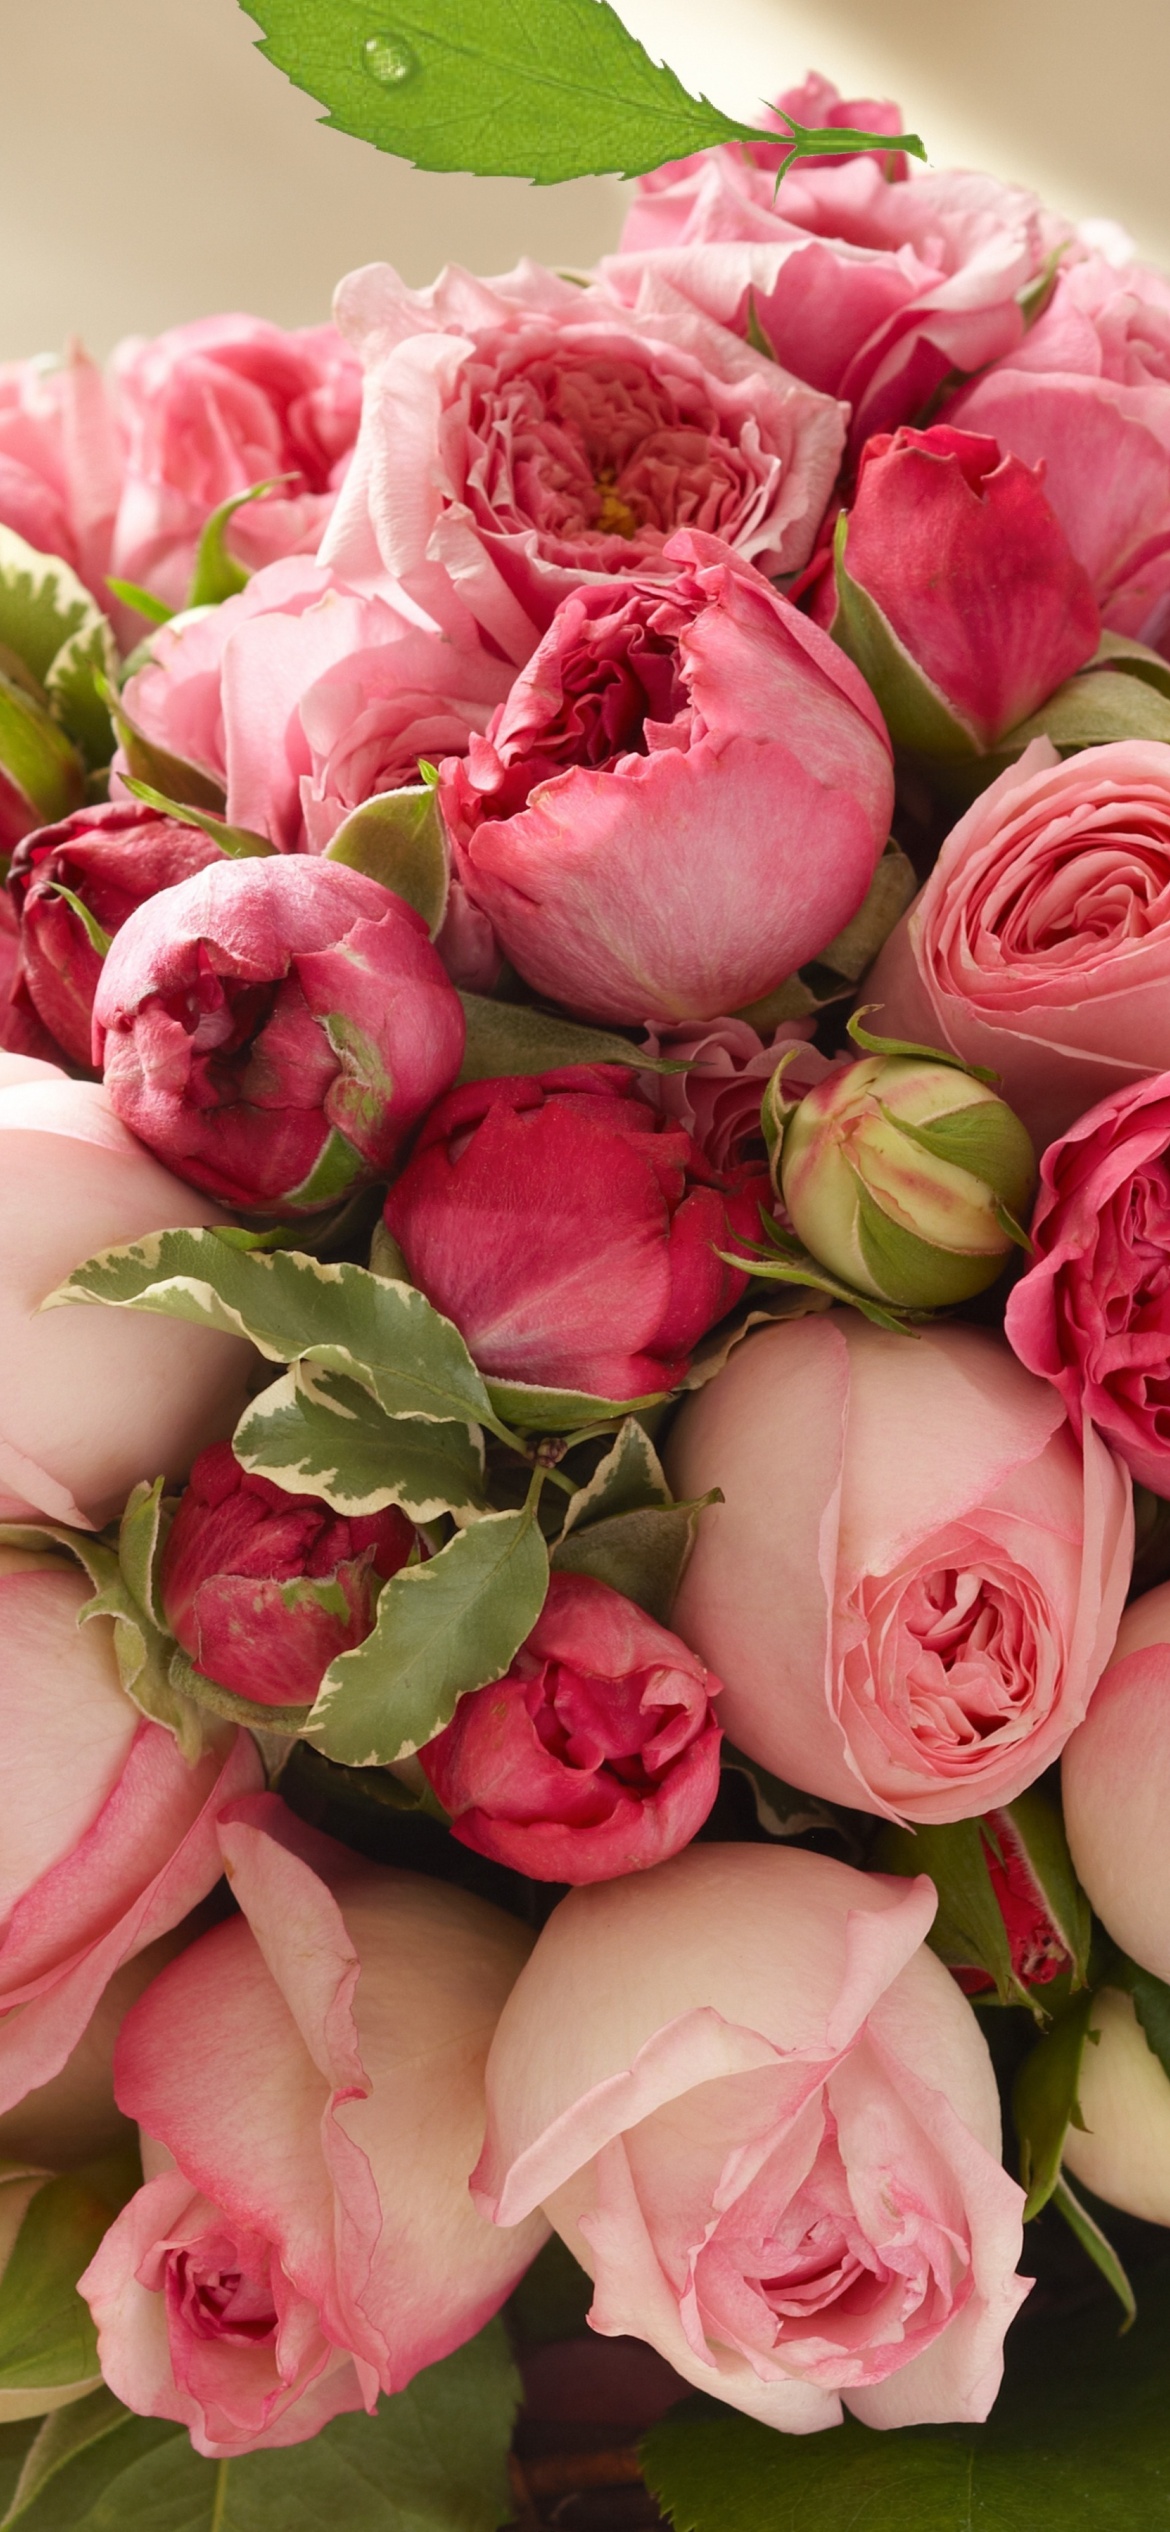 Bouquet of pink roses wallpaper 1170x2532